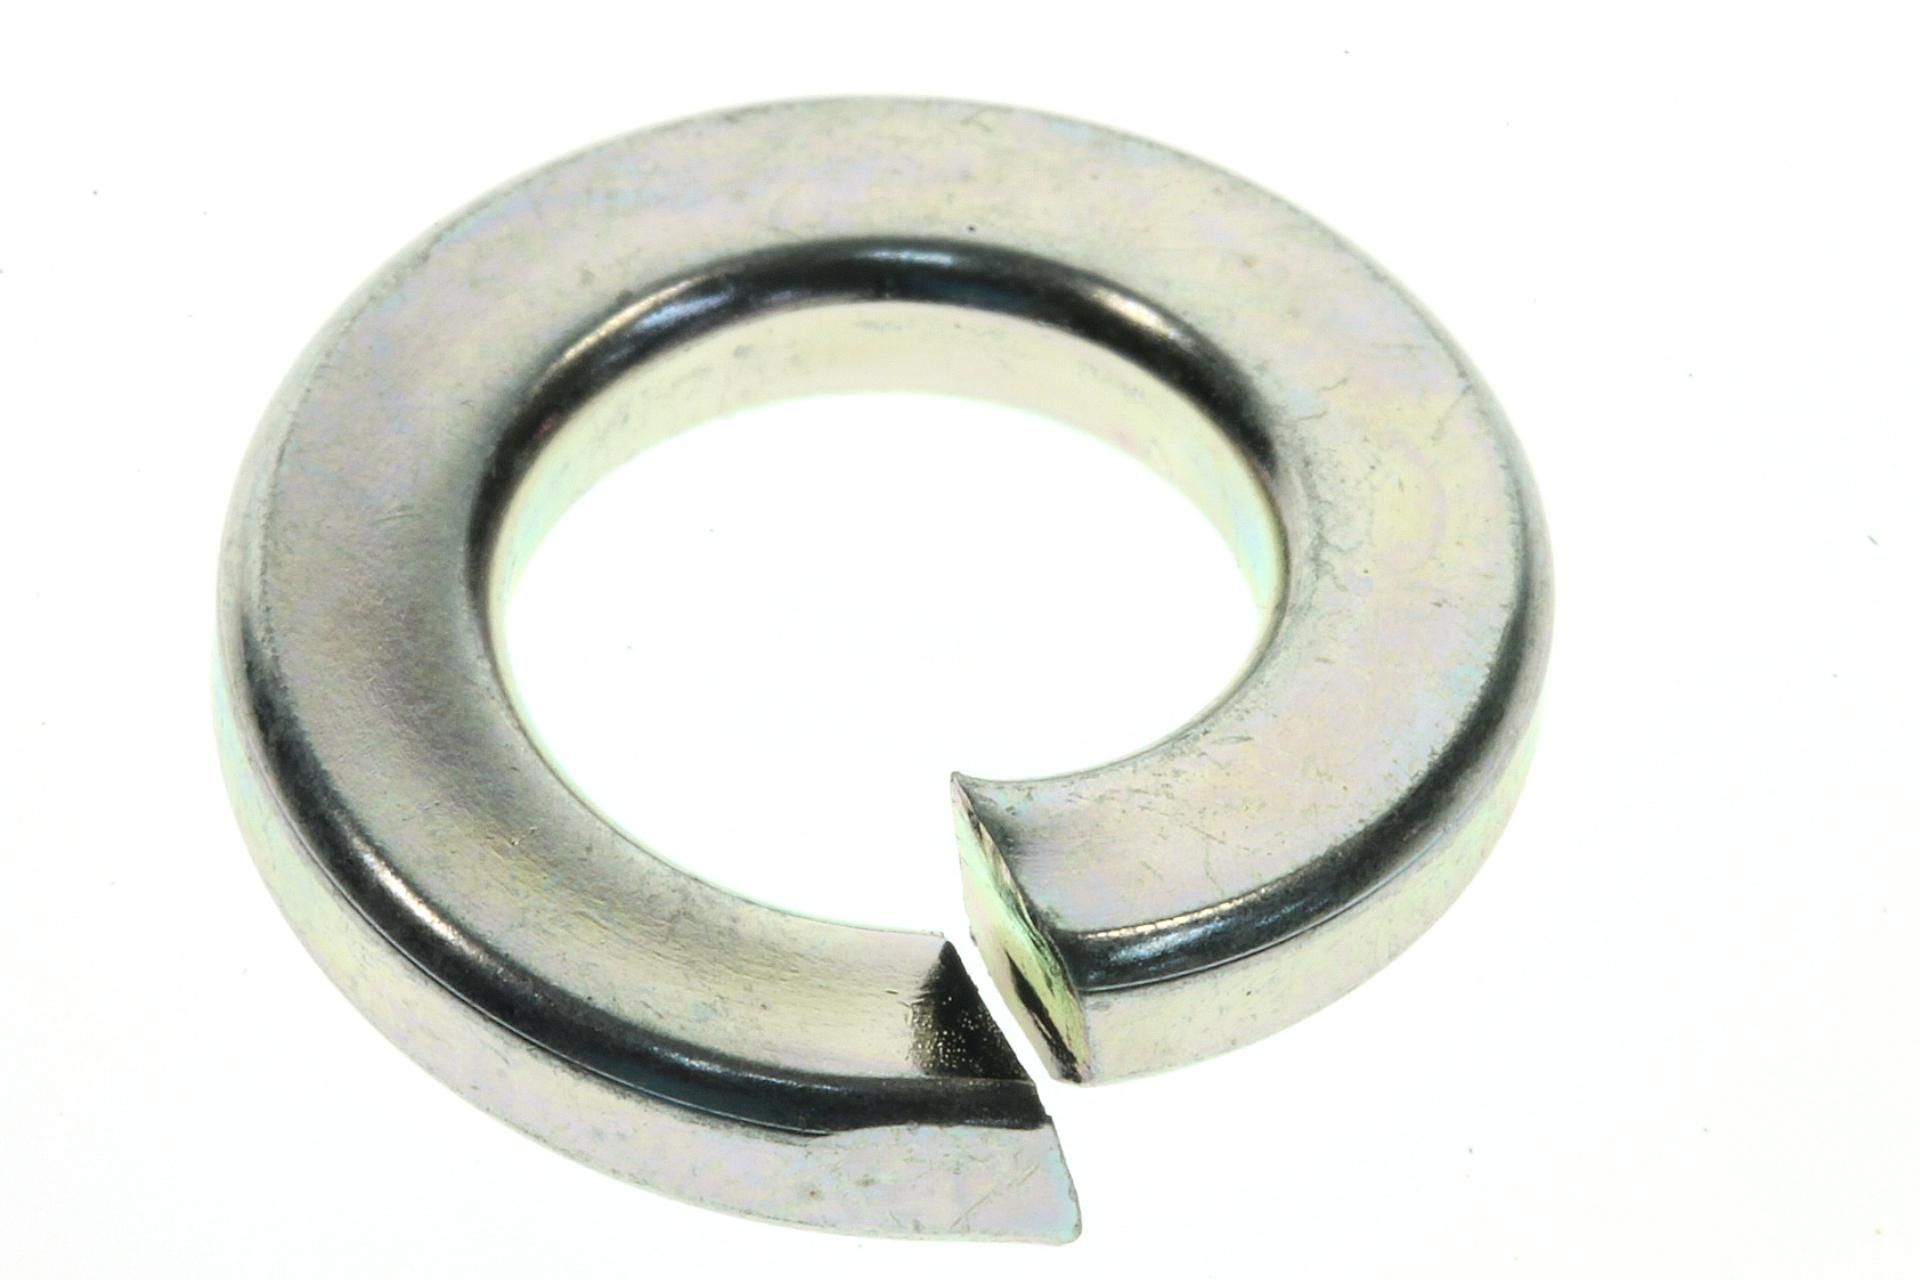 08321-31106 Superseded by 08321-0110A - WASHER,LOCK